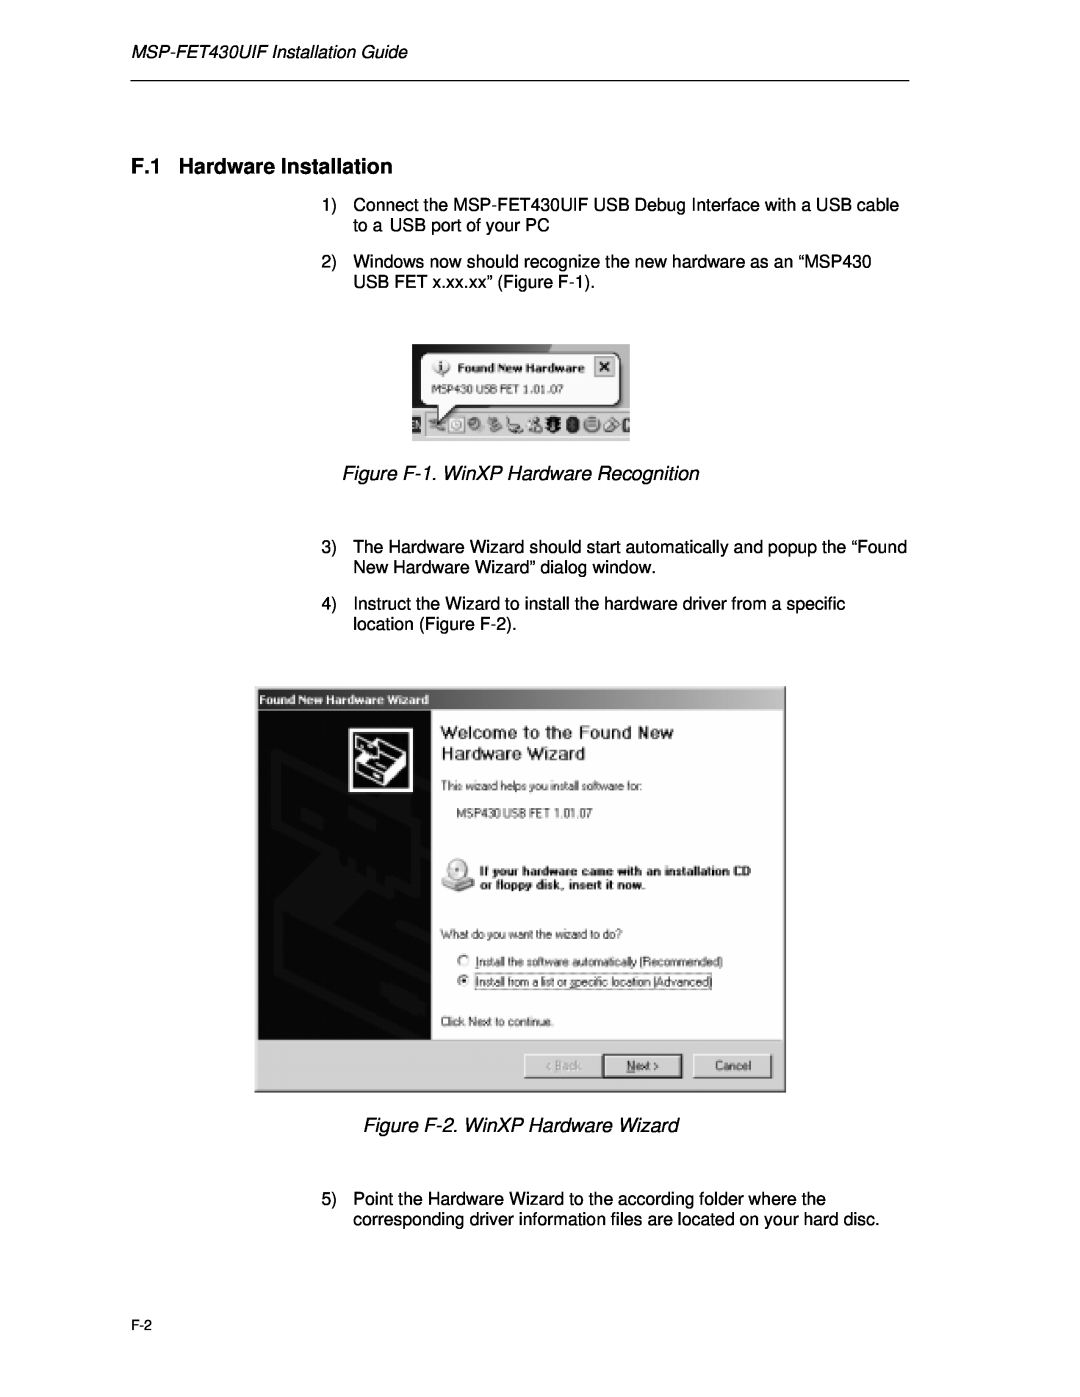 Texas Instruments MSP-FET430 manual F.1 Hardware Installation, Figure F-1. WinXP Hardware Recognition 